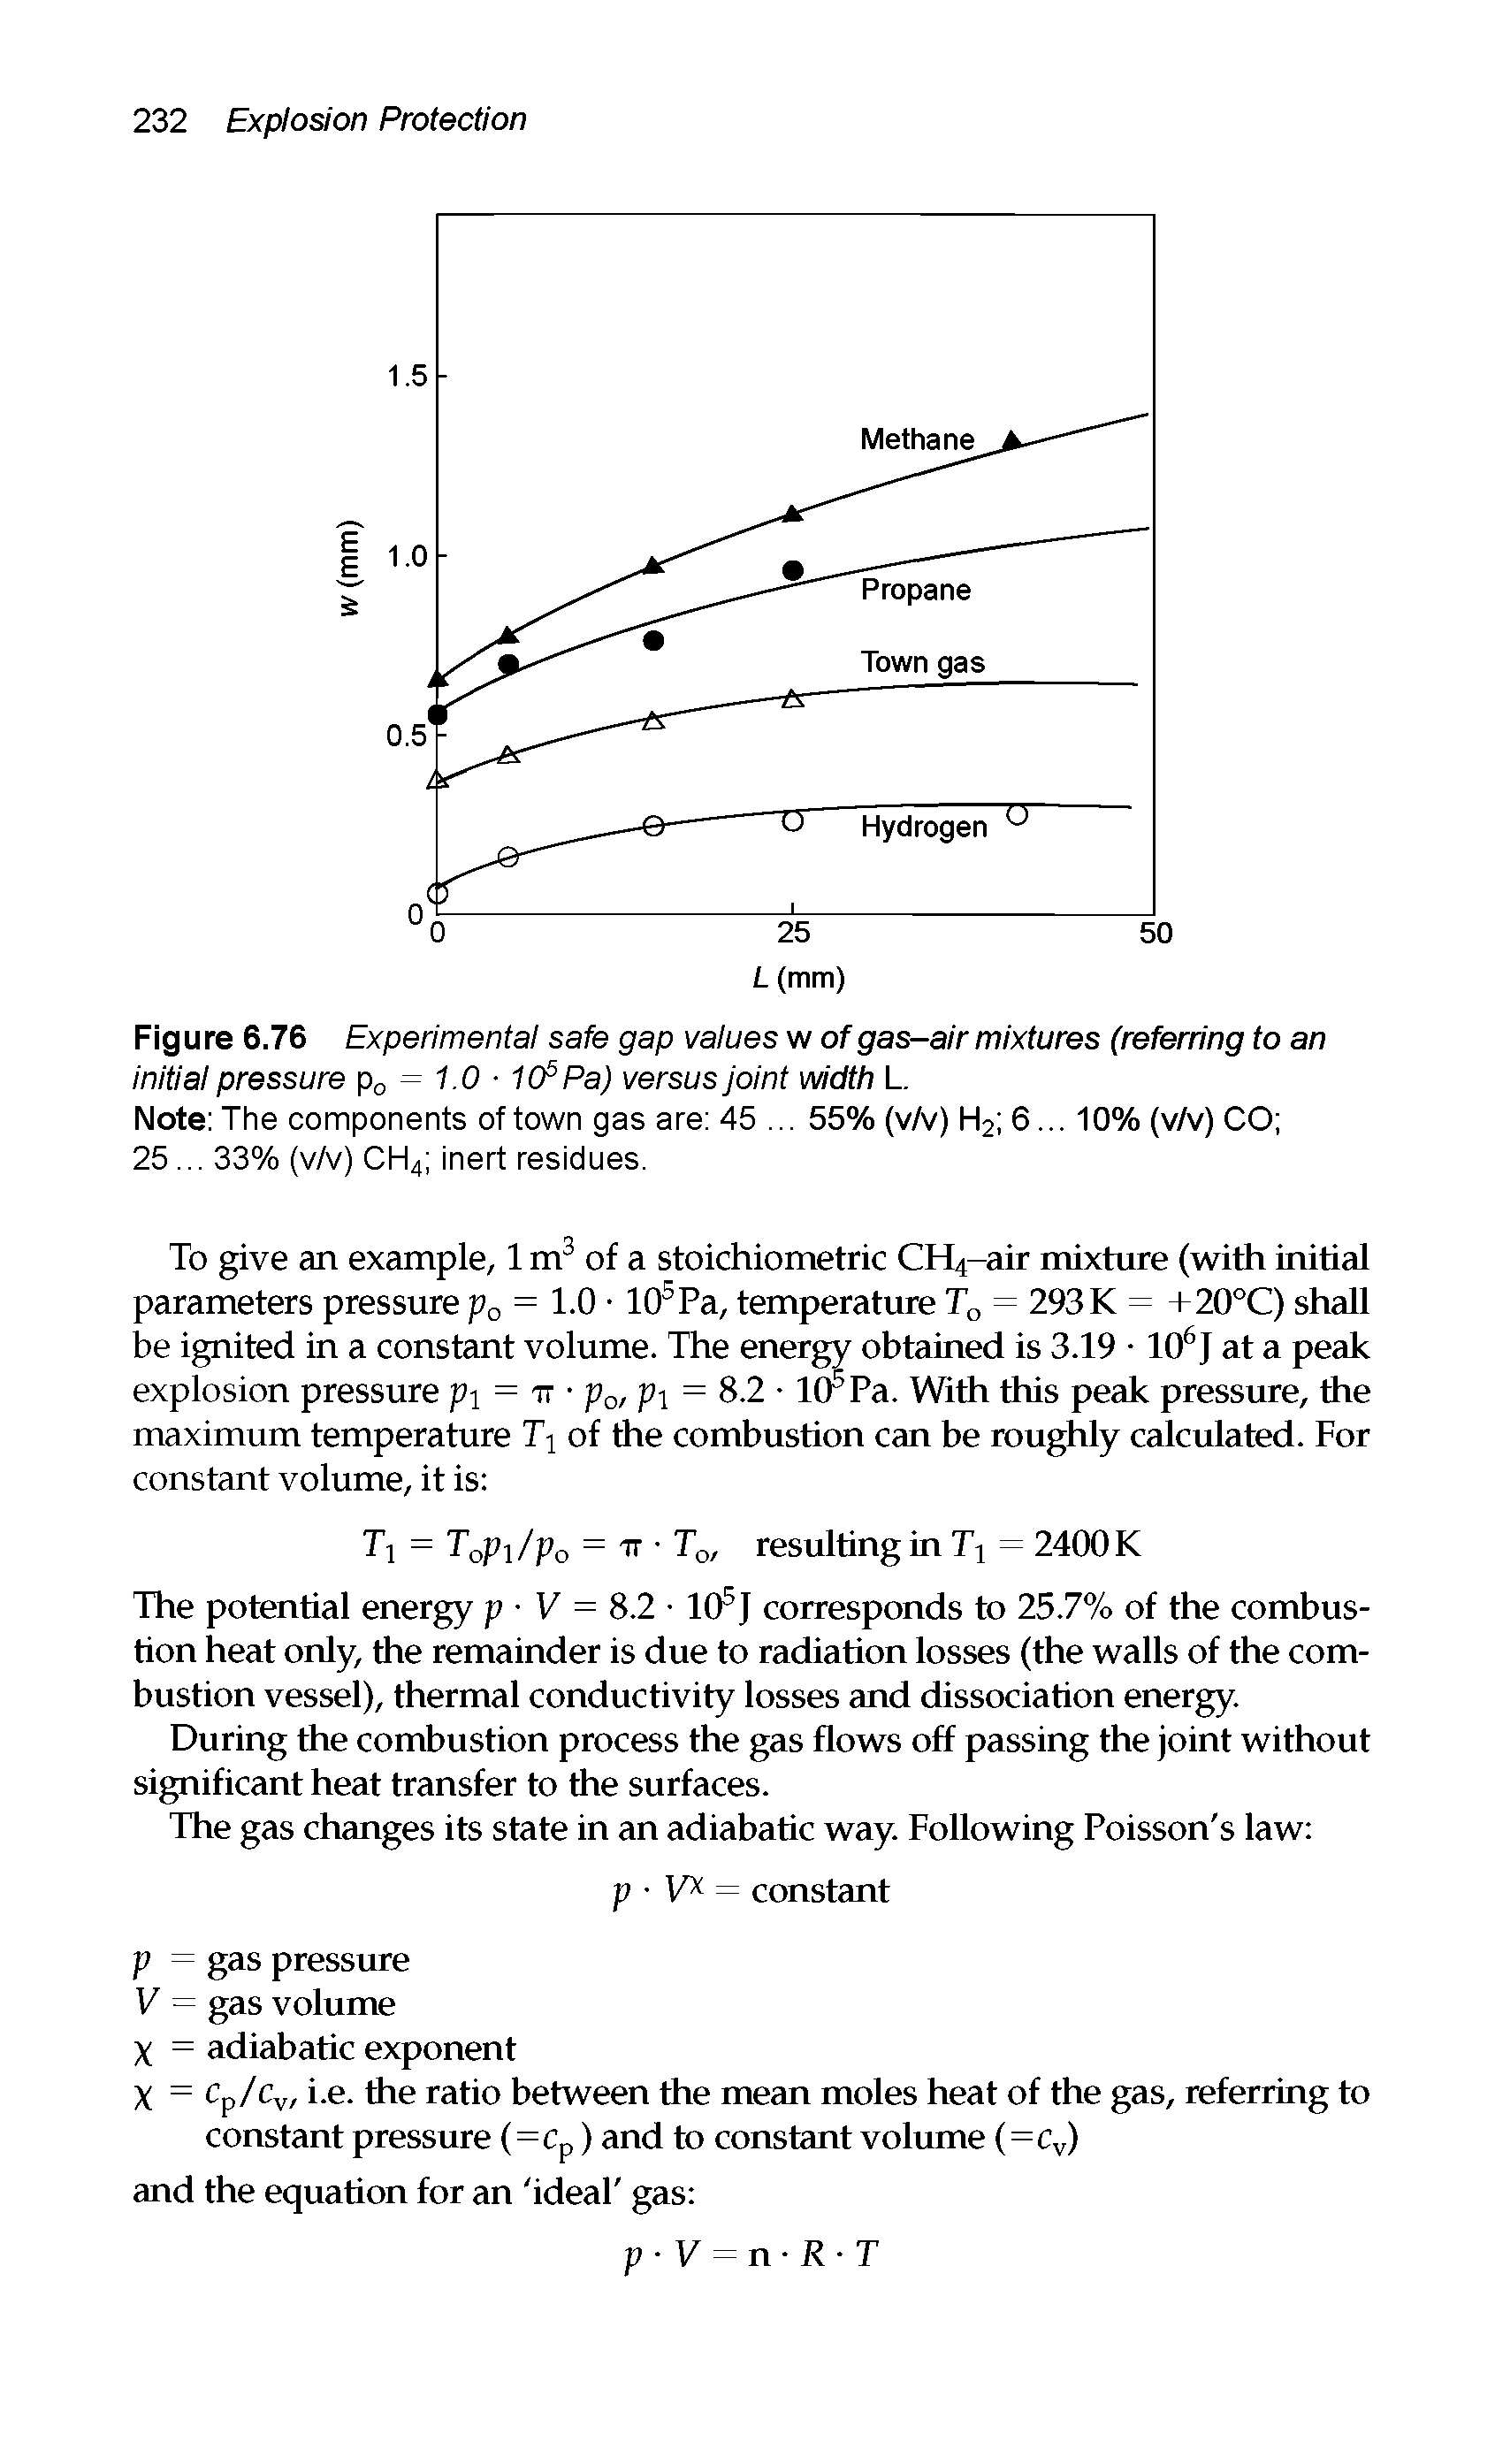 Figure 6.76 Experimental safe gap values w of gas-air mixtures (referring to an initial pressure p0 = 1.0 105 Pa) versus joint width L.